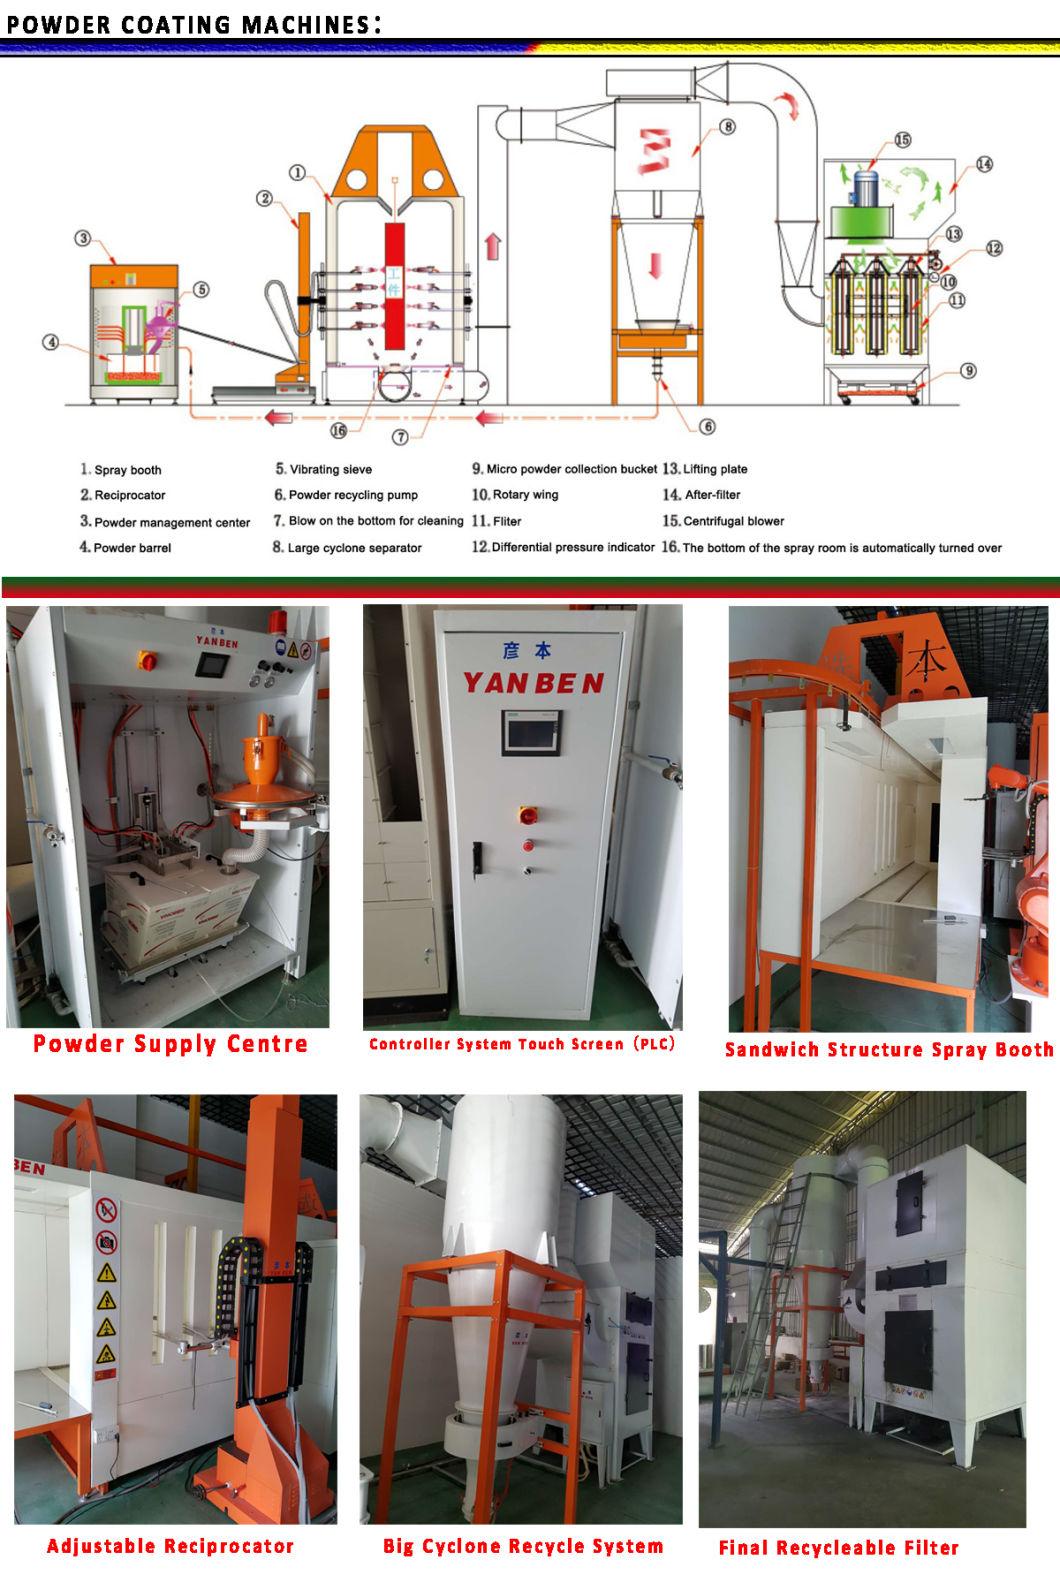 Powder Coating/Spray/Paint/Box Feed Machine for Easy Changing Color